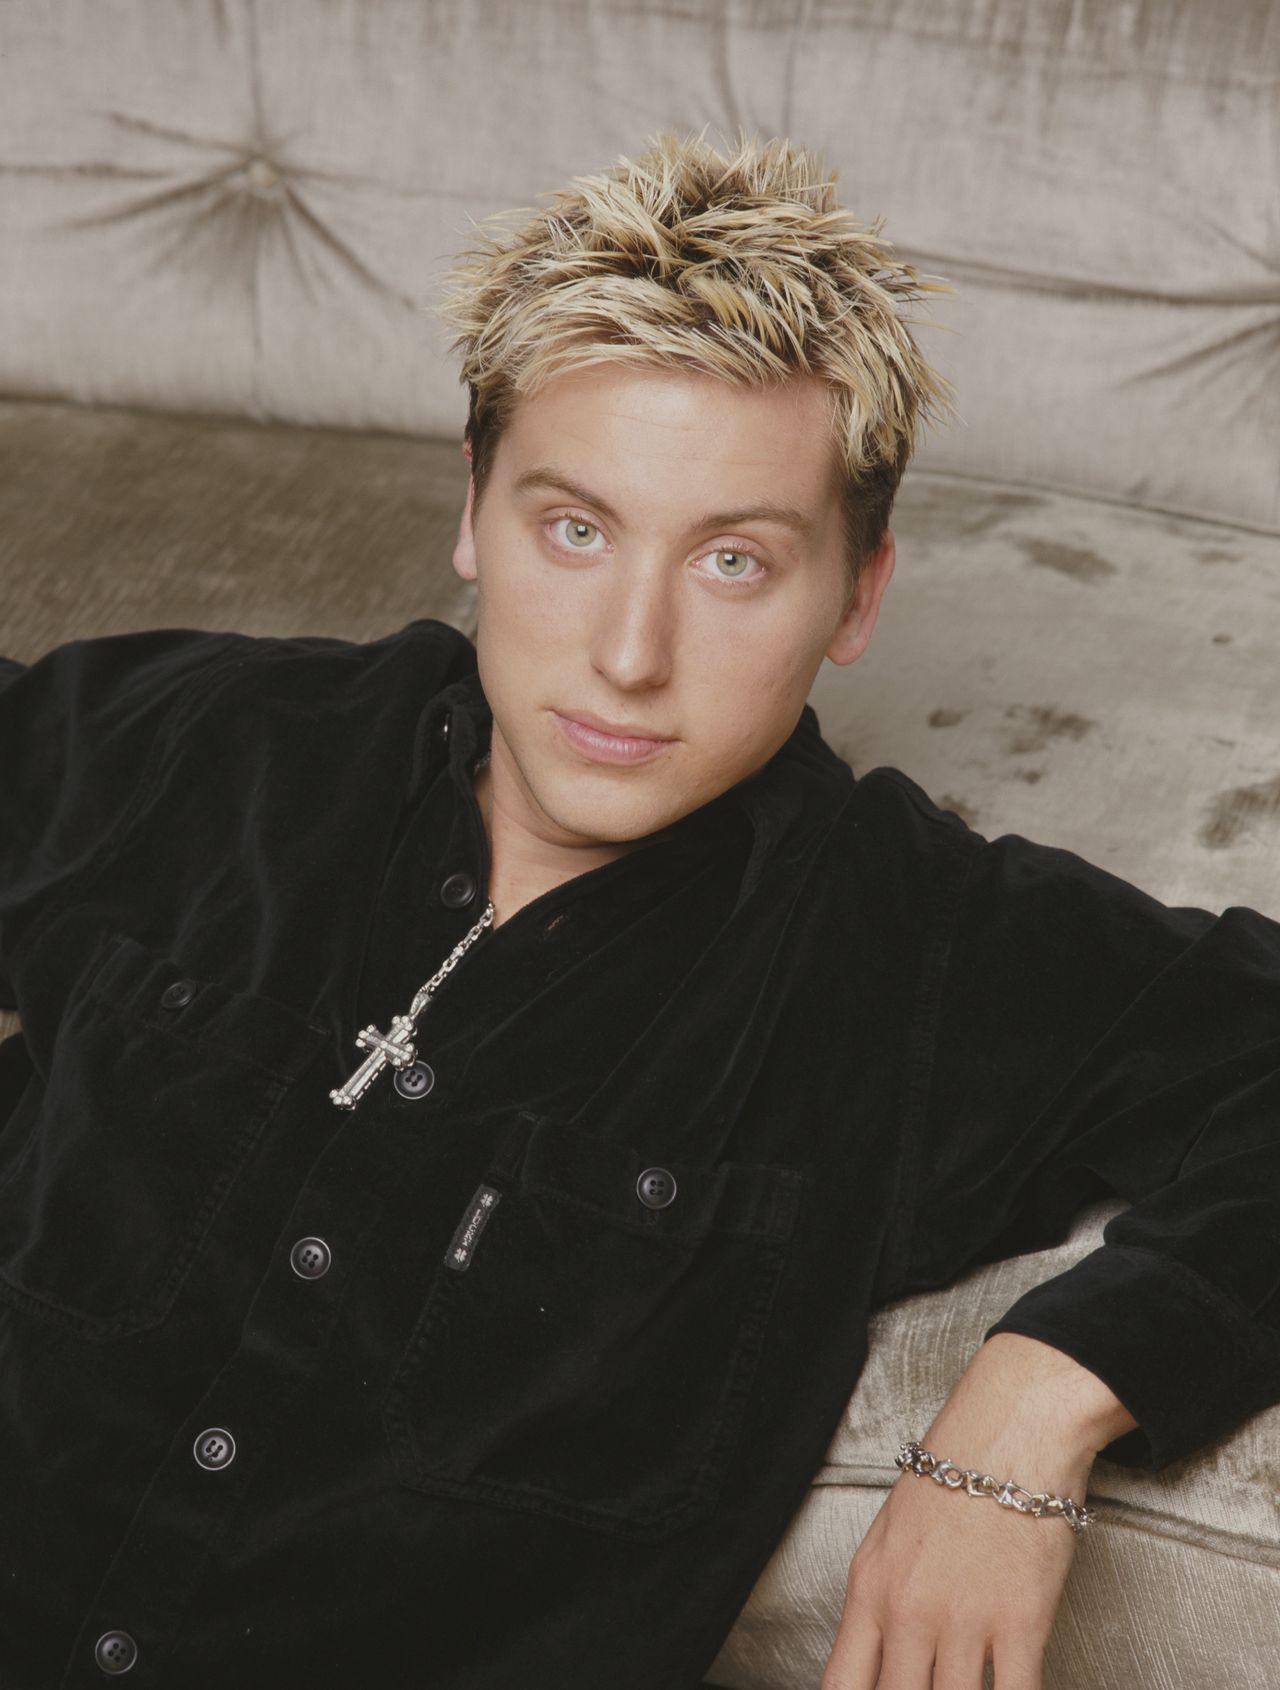 Lance Bass poses for a photo in 2001.